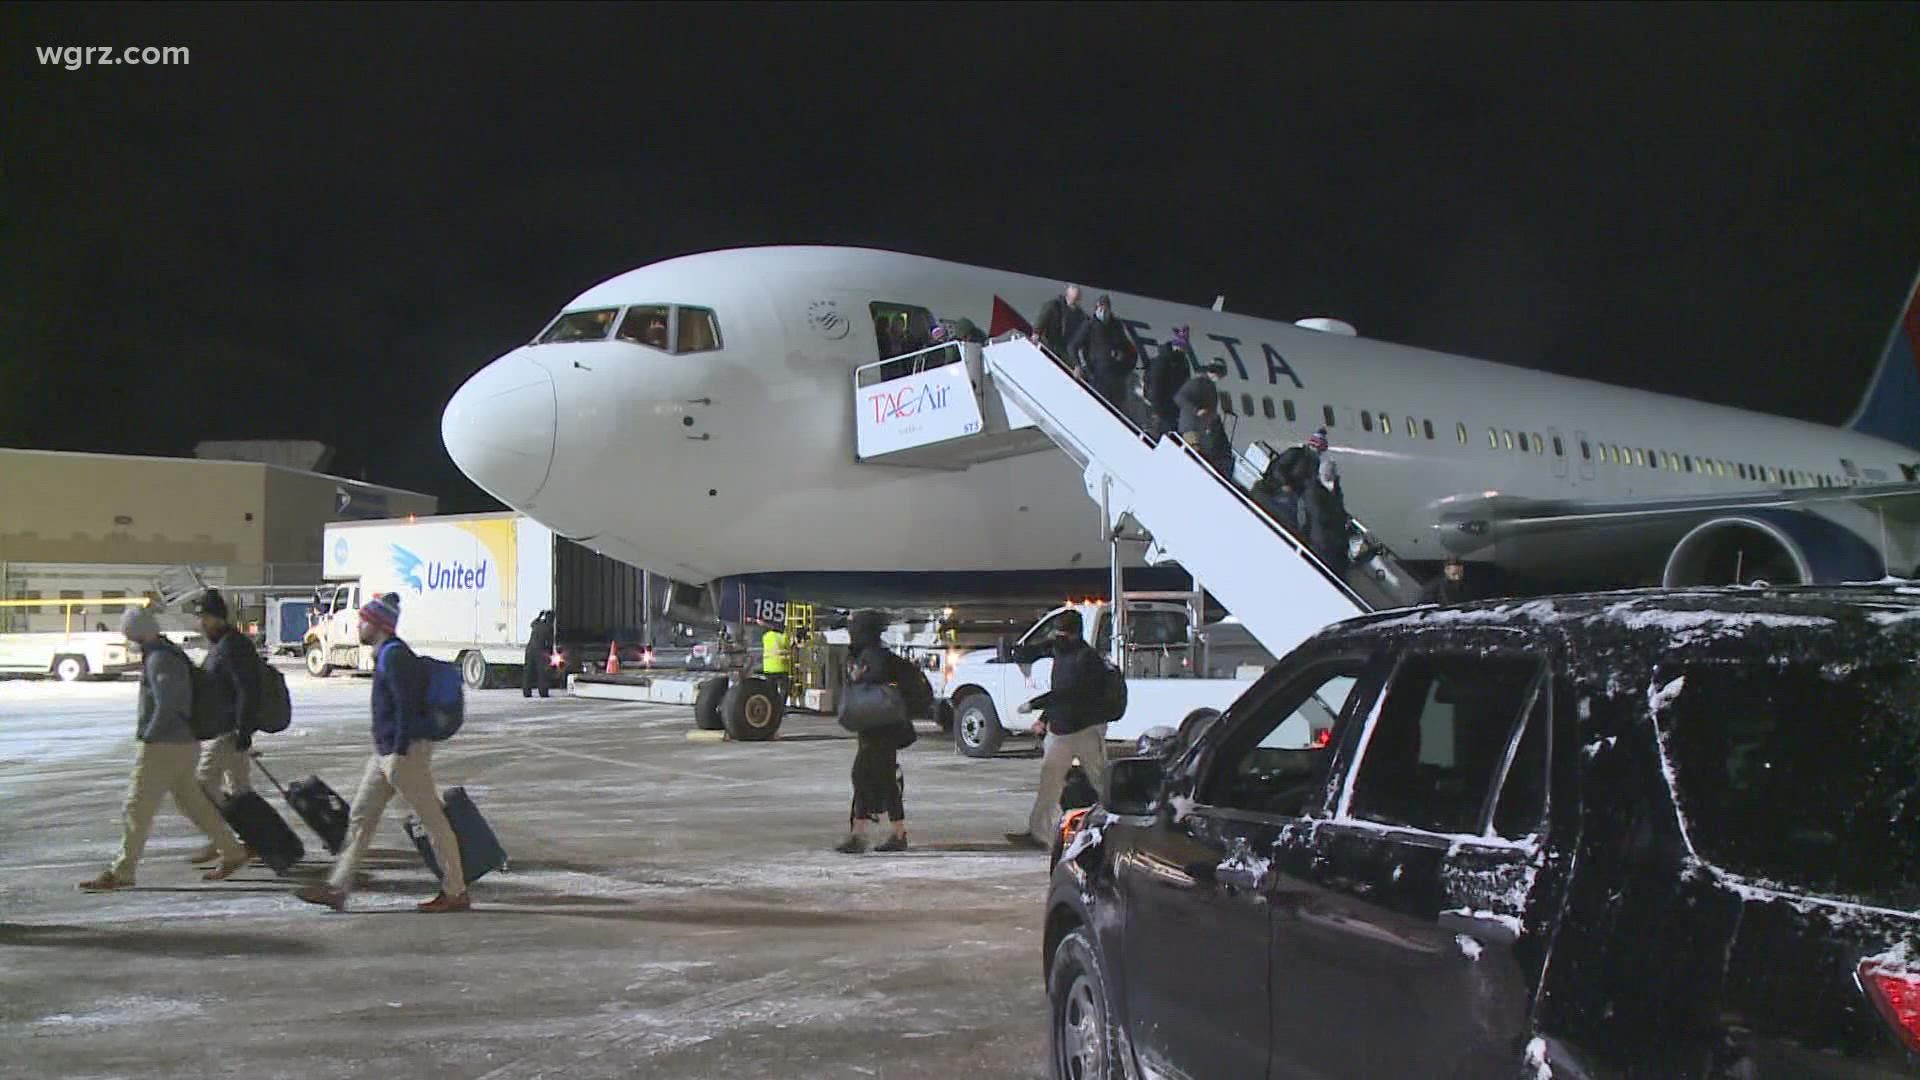 Bills fans started arriving to the airport by 12:30 a.m. but the team didn't land until close to 3 a.m.